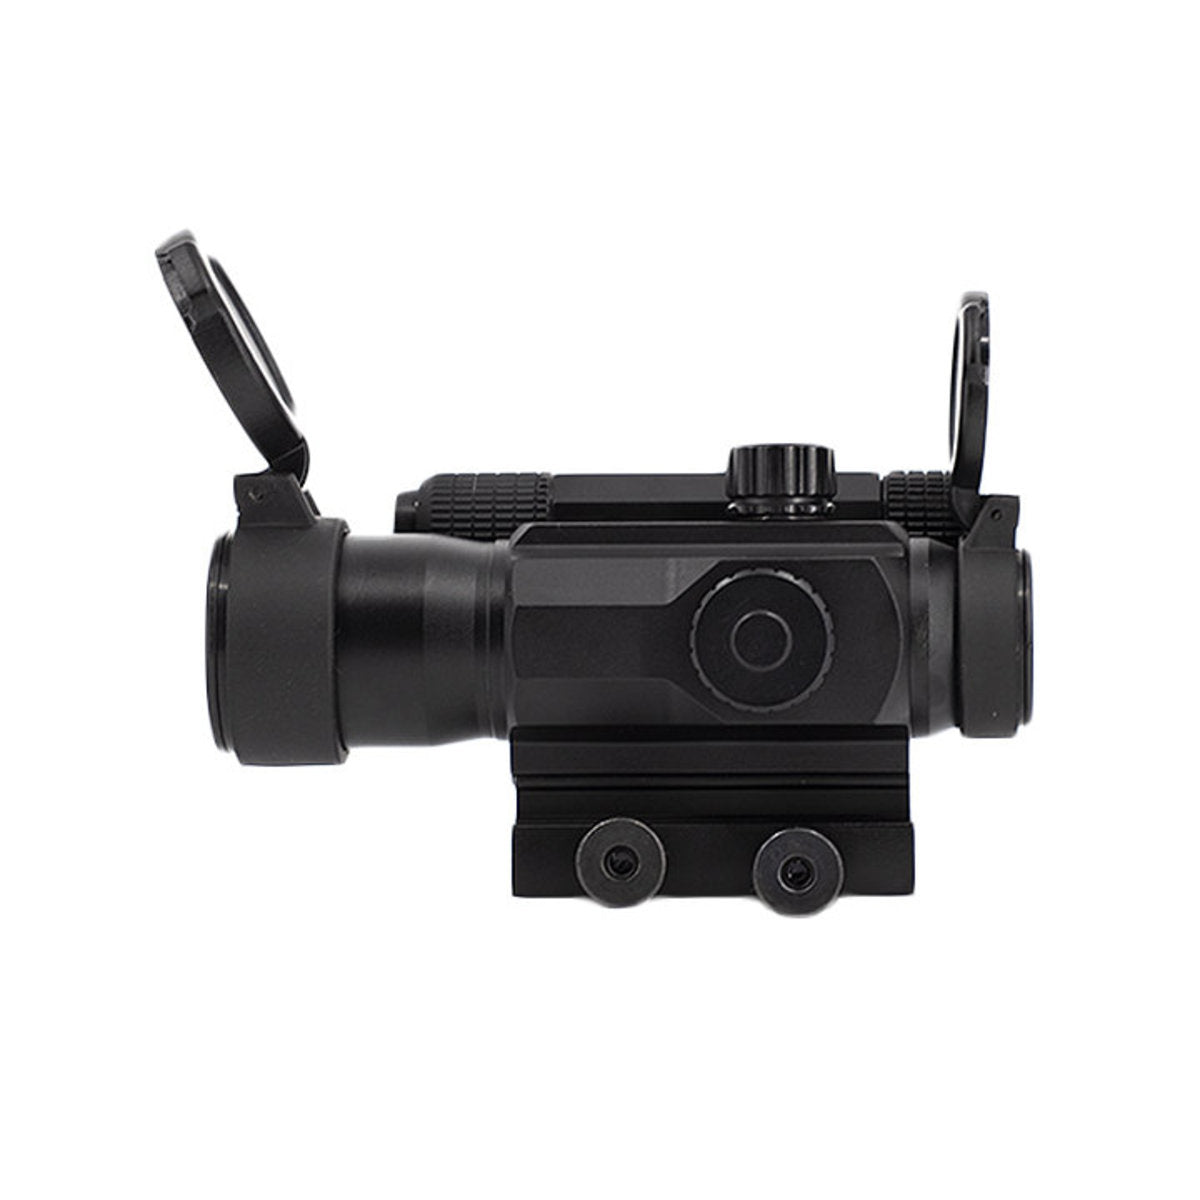 Valken 1x35 Multi-Reticle Red Dot Sight - Eminent Paintball And Airsoft